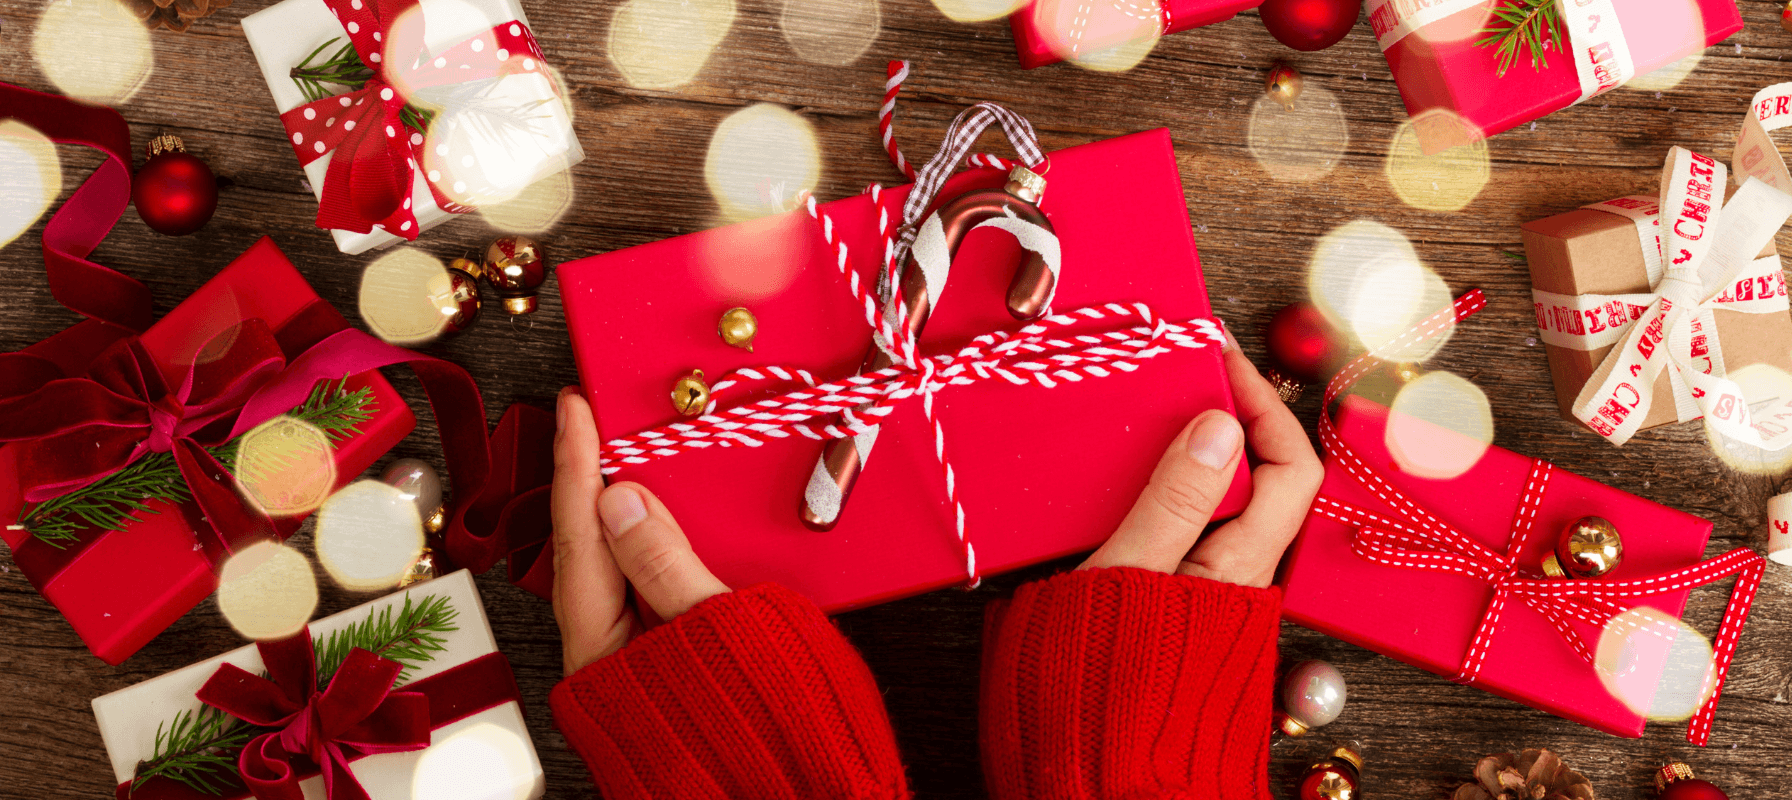 The Data-Driven Gift-Giving Guide